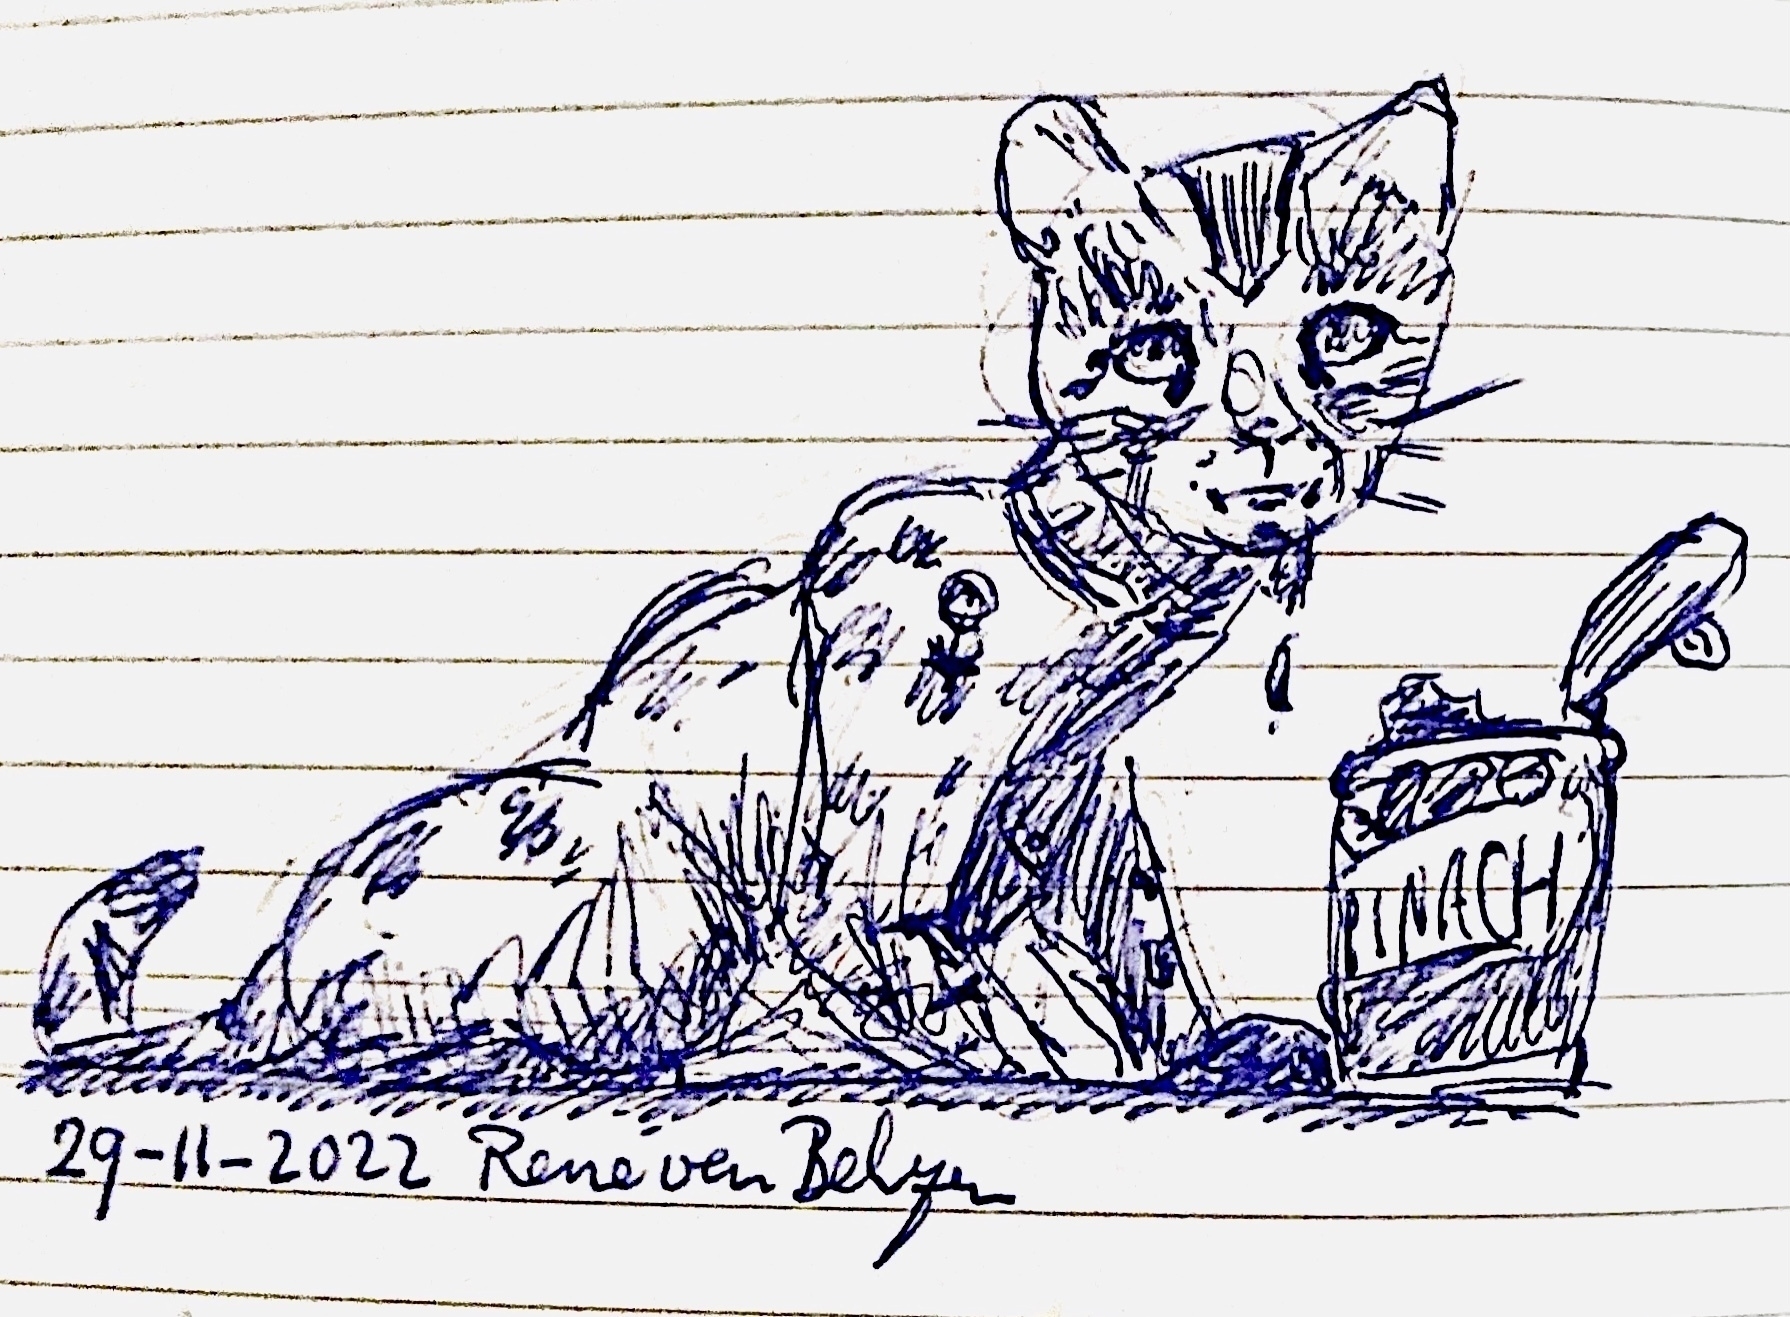 ballpoint sketch of cat eating spinach from a can